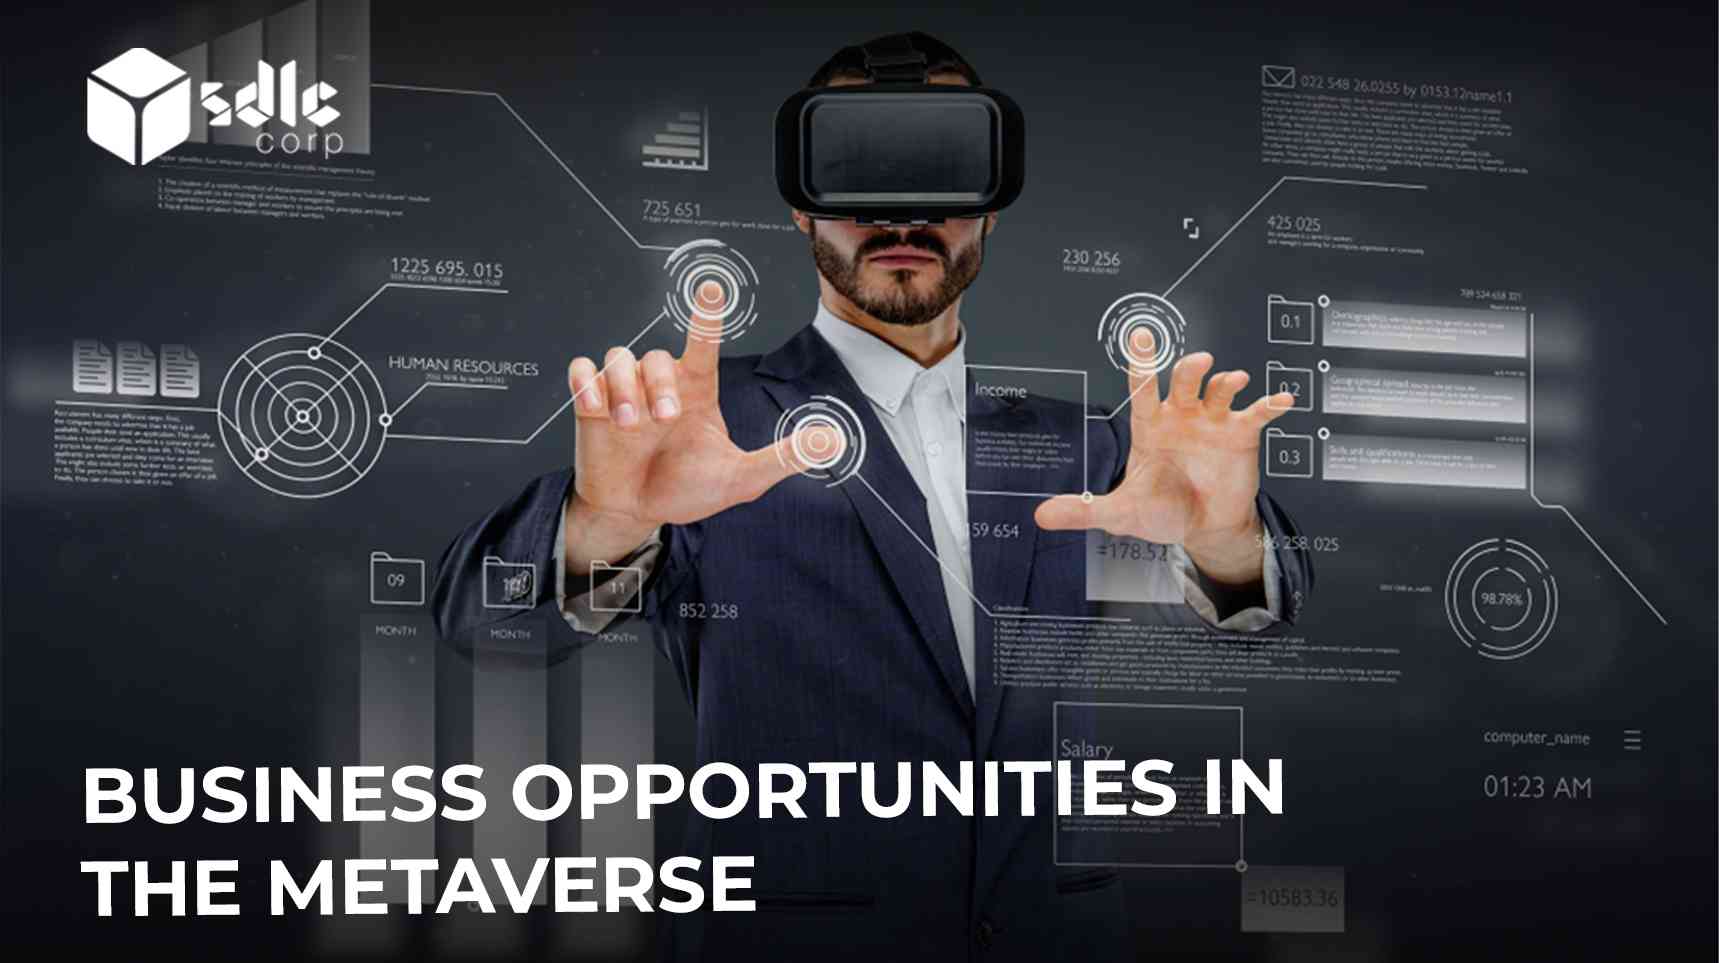 Business opportunities in the metaverse